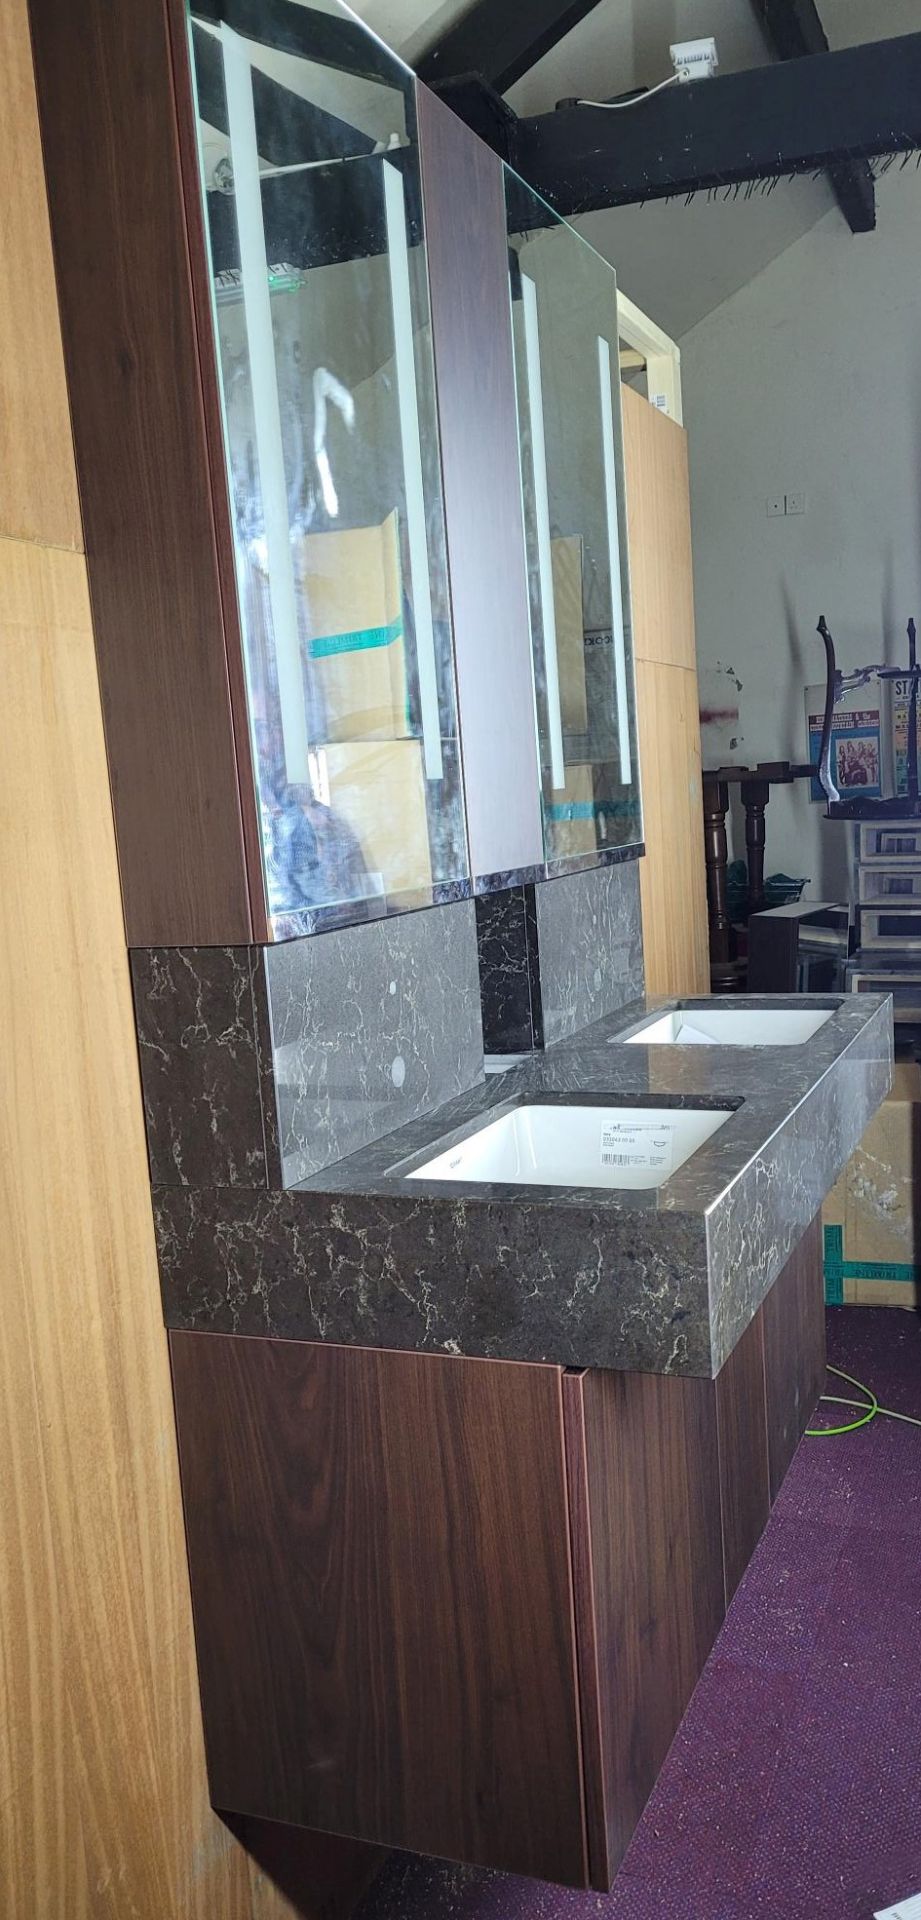 Bespoke twin basin black variegated granite bathroom sink unit, with mirrored cabinets, - Image 2 of 11